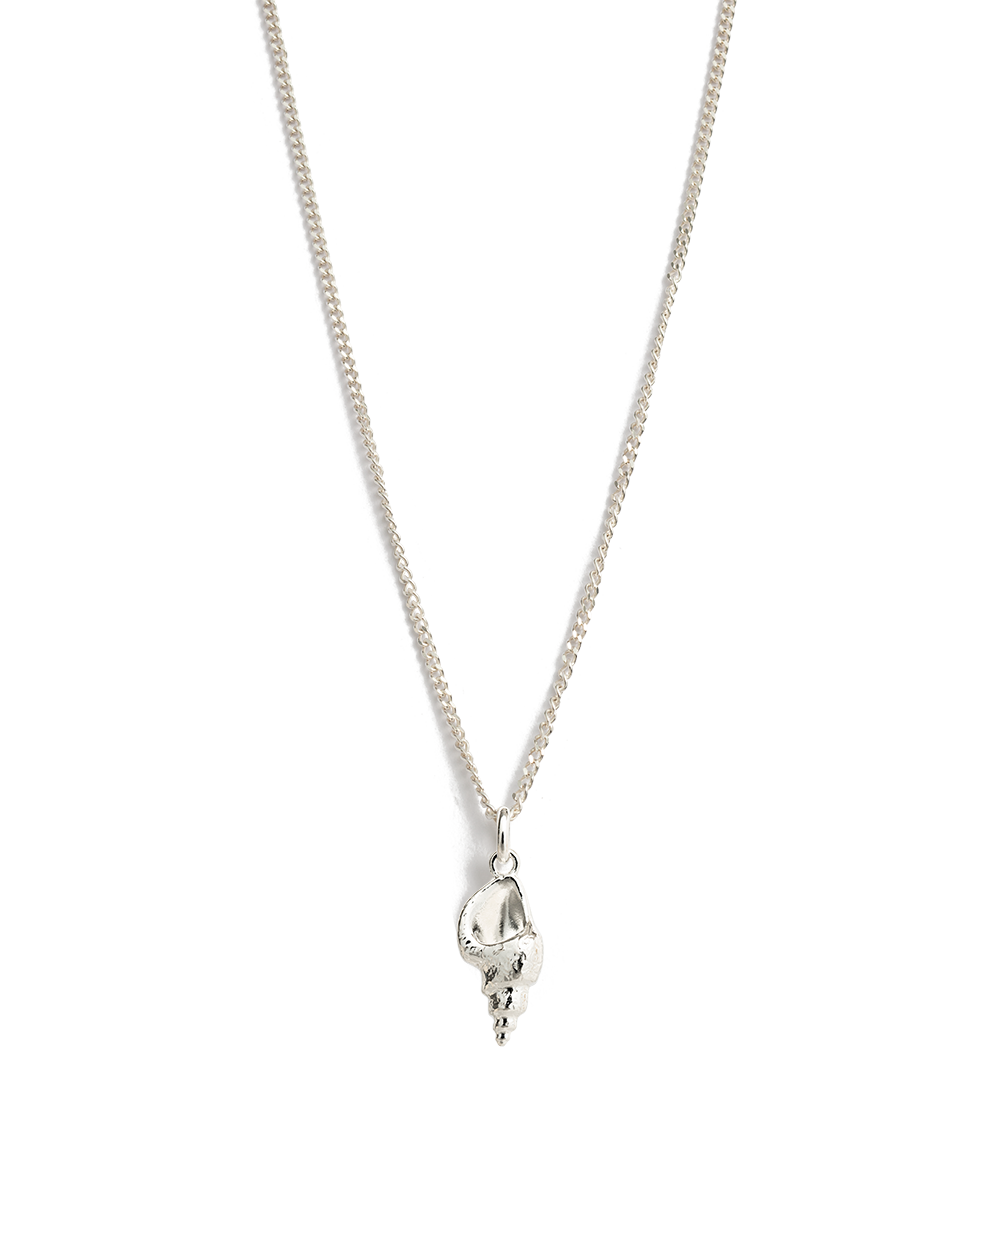 CONCH SHELL NECKLACE (STERLING SILVER) - IMAGE 1